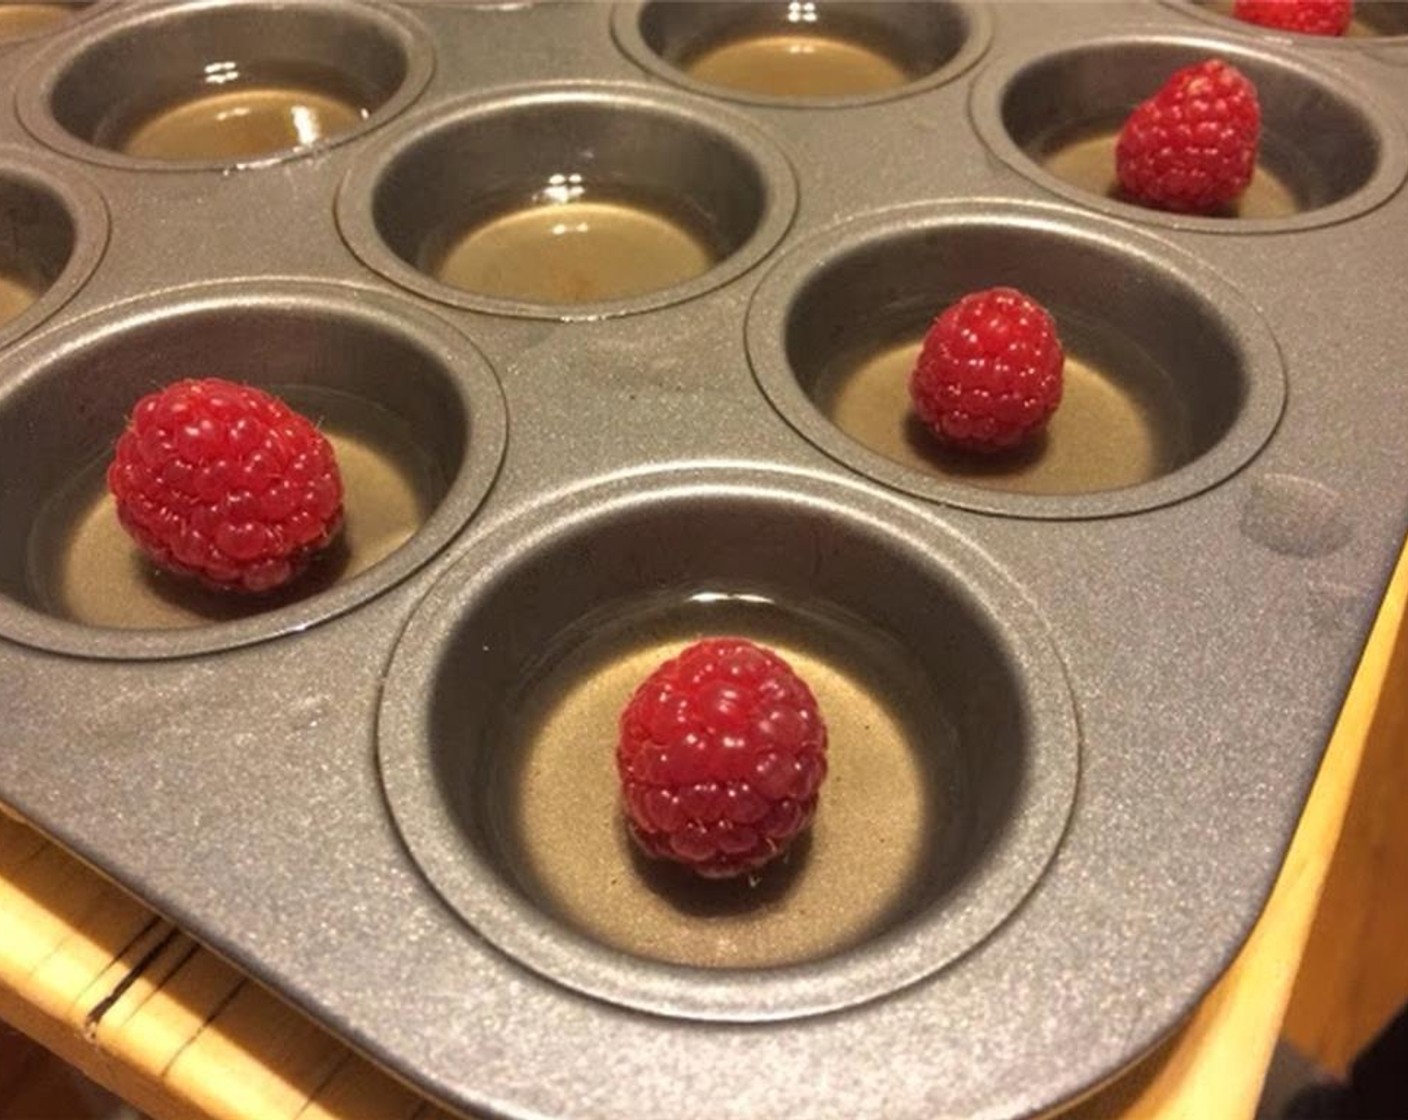 step 4 Remove from heat and pour in the remaining 1 3/4 cups of champagne and the Framboise Liqueur (1/4 cup). Transfer to something with a pour spout. Fill muffin pan about 1/3 to half full. Place in refrigerator to lightly set, for 15 minutes.